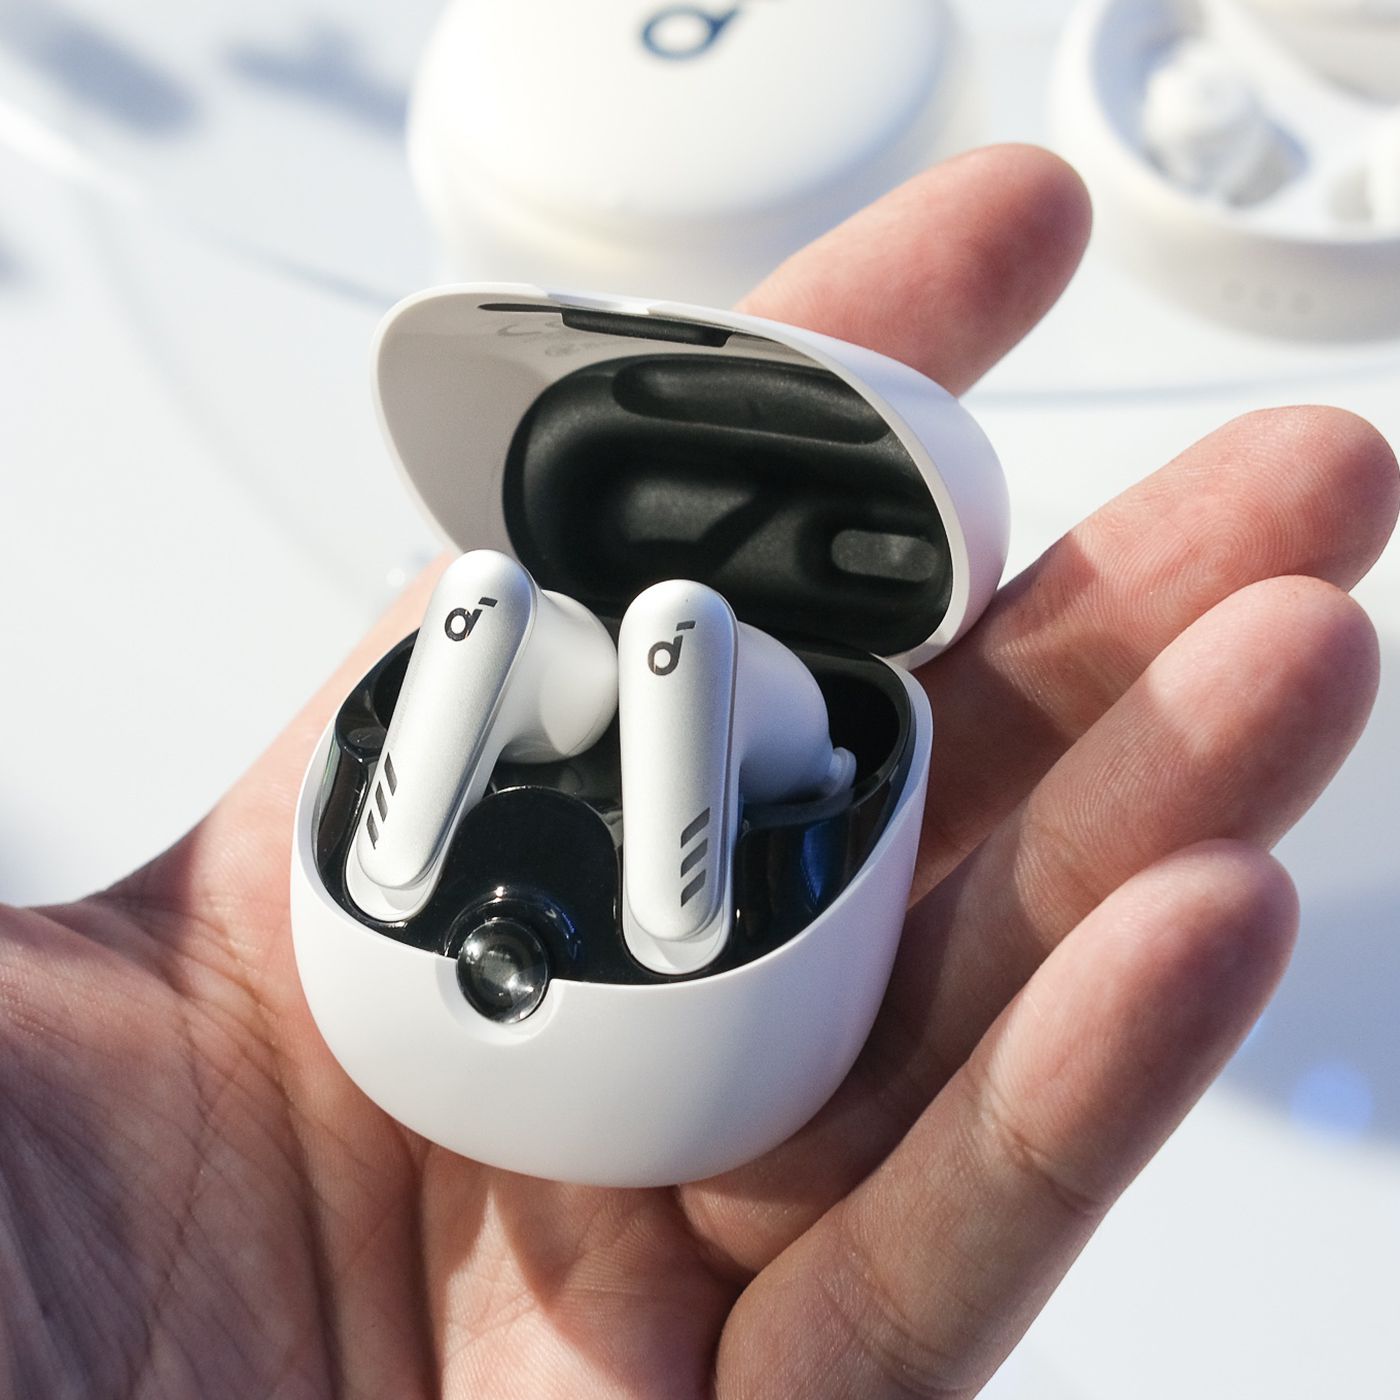 Anker's new earbuds line includes models for gaming and sleep